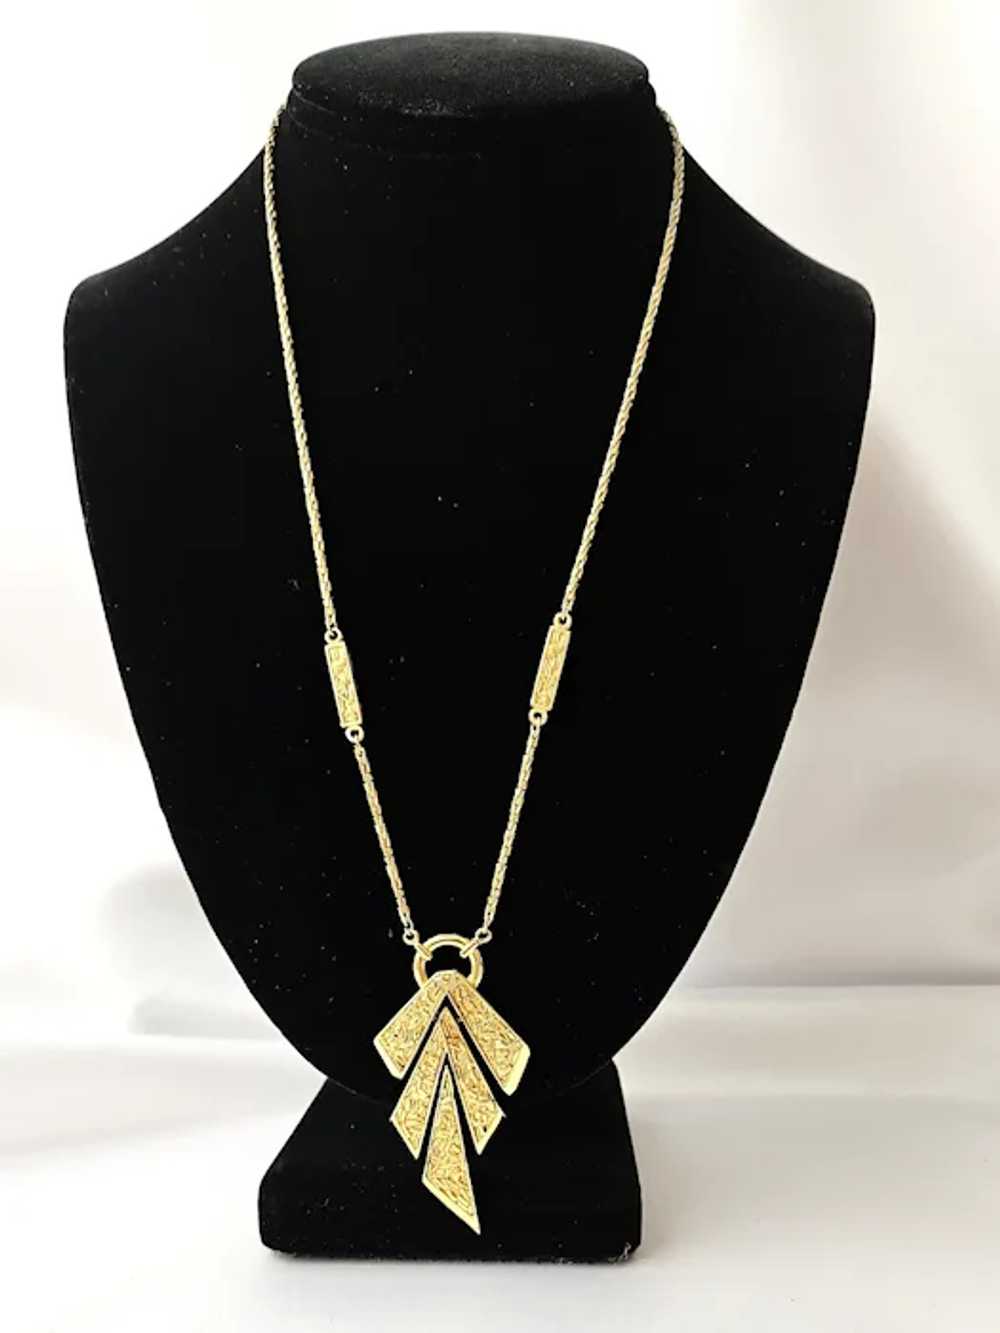 Vintage Trifari Gold-Tone Metal Sections Necklace - image 4